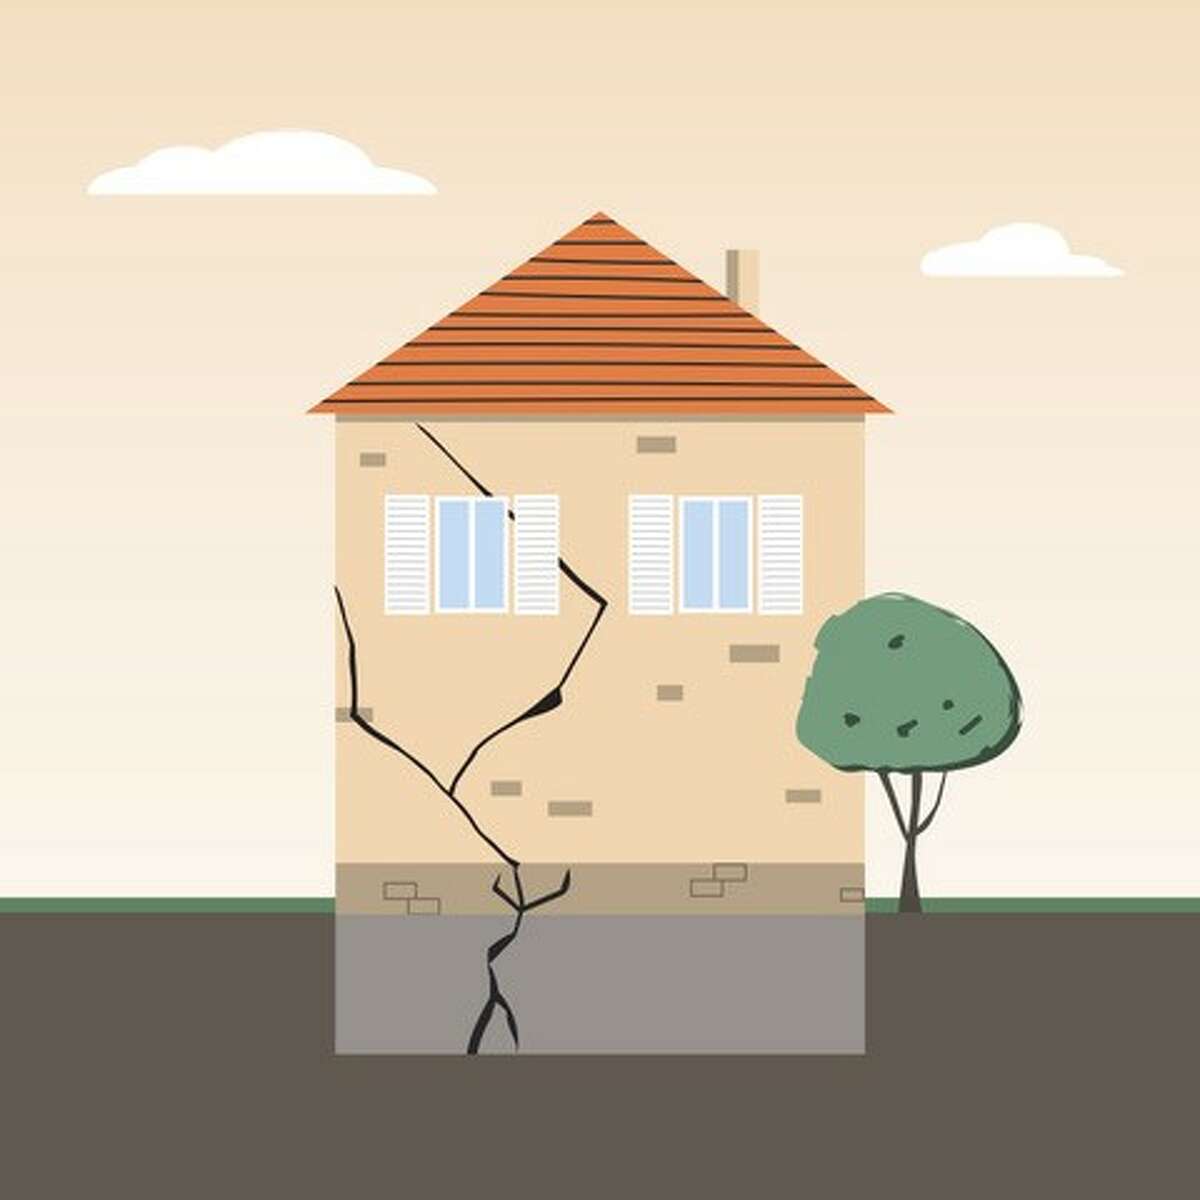 When drought causes soil under and around a home's foundation to shrink, it can cause walls to crack, doors and windows to go out of plumb and, in a worst-case scenario, water and sewage lines to break.